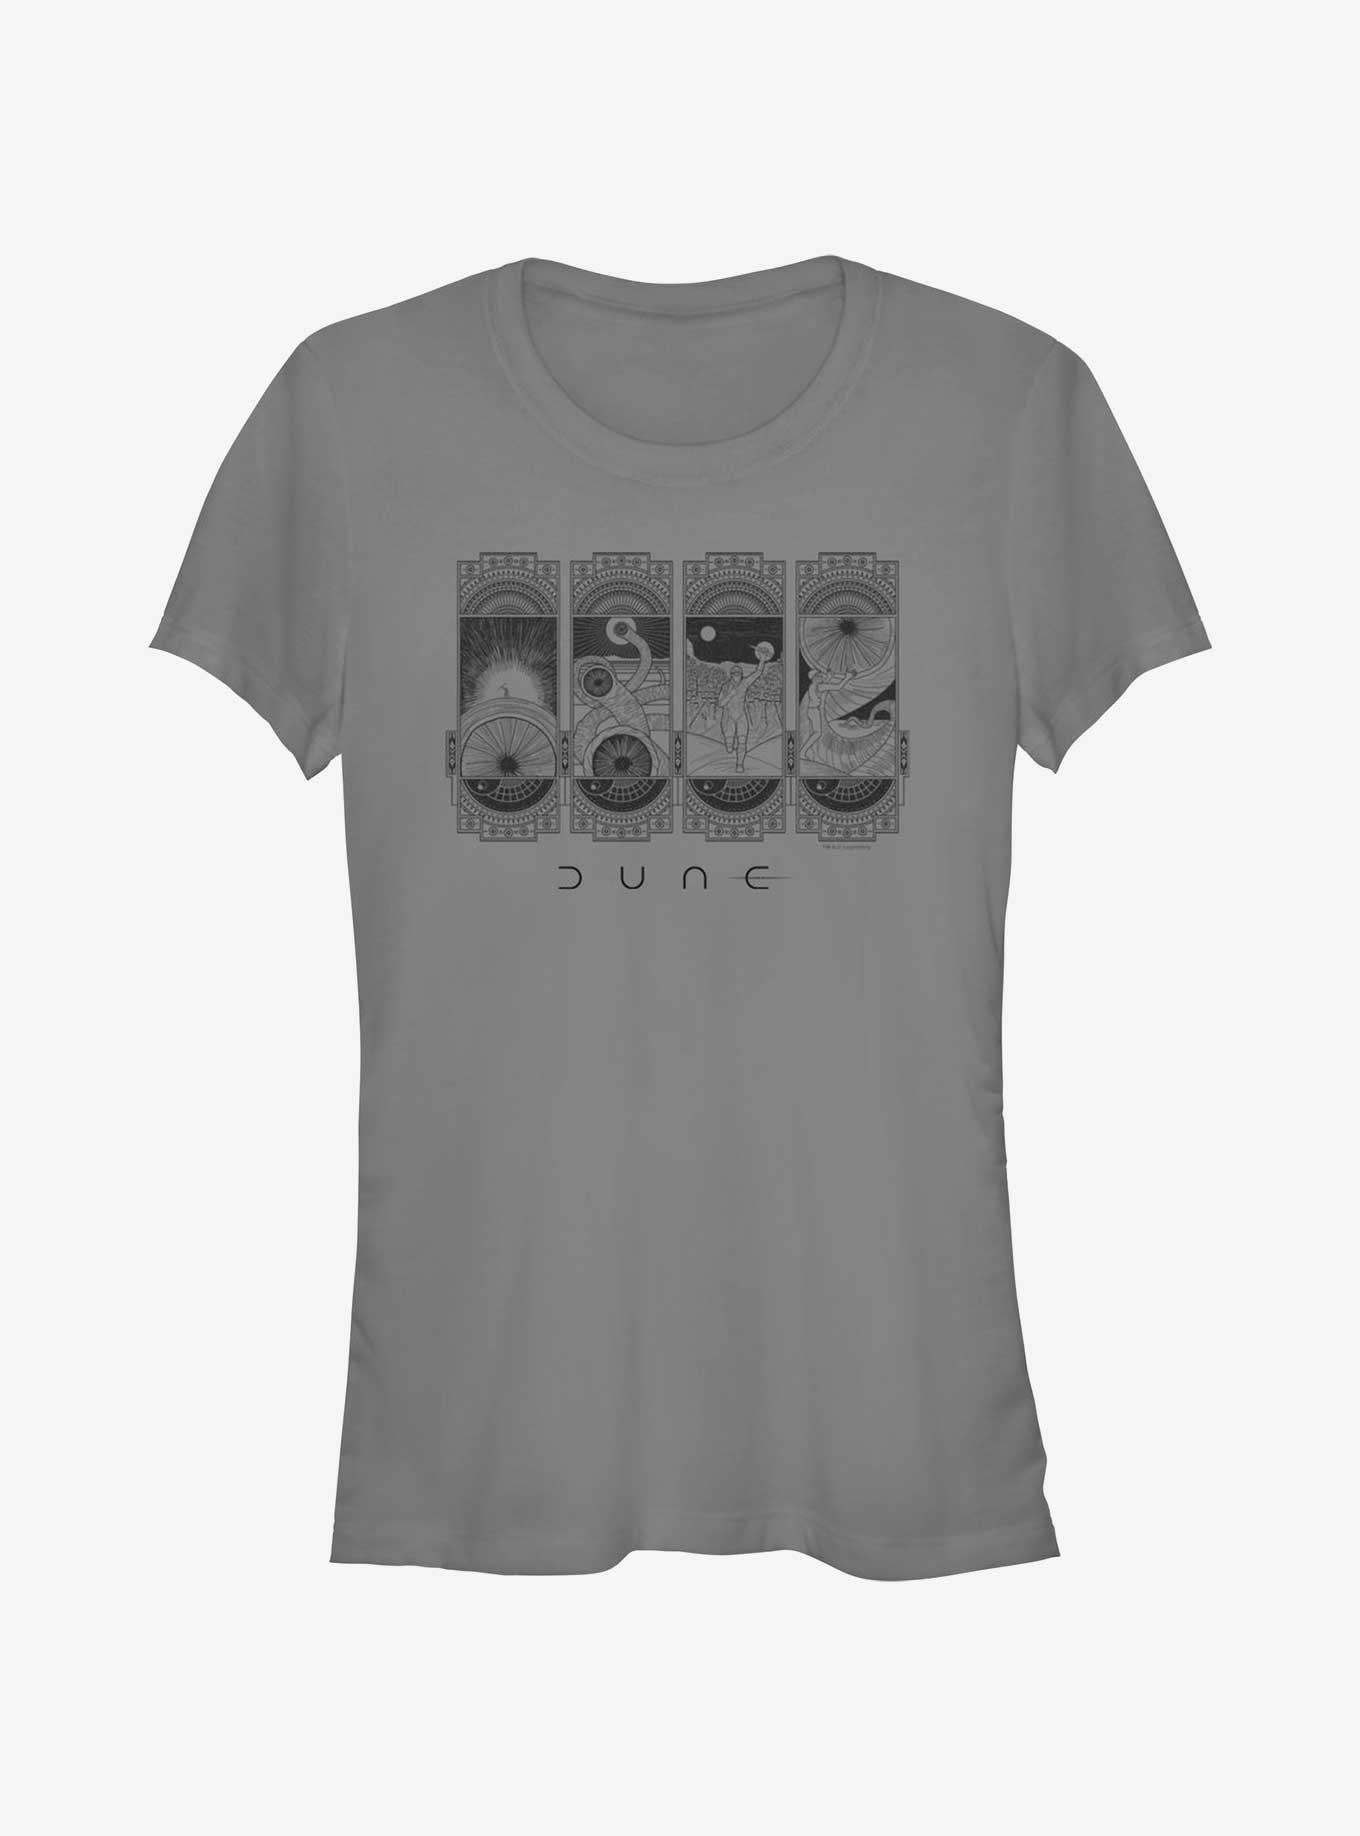 Dune: Part Two Pictograms Girls T-Shirt, CHARCOAL, hi-res